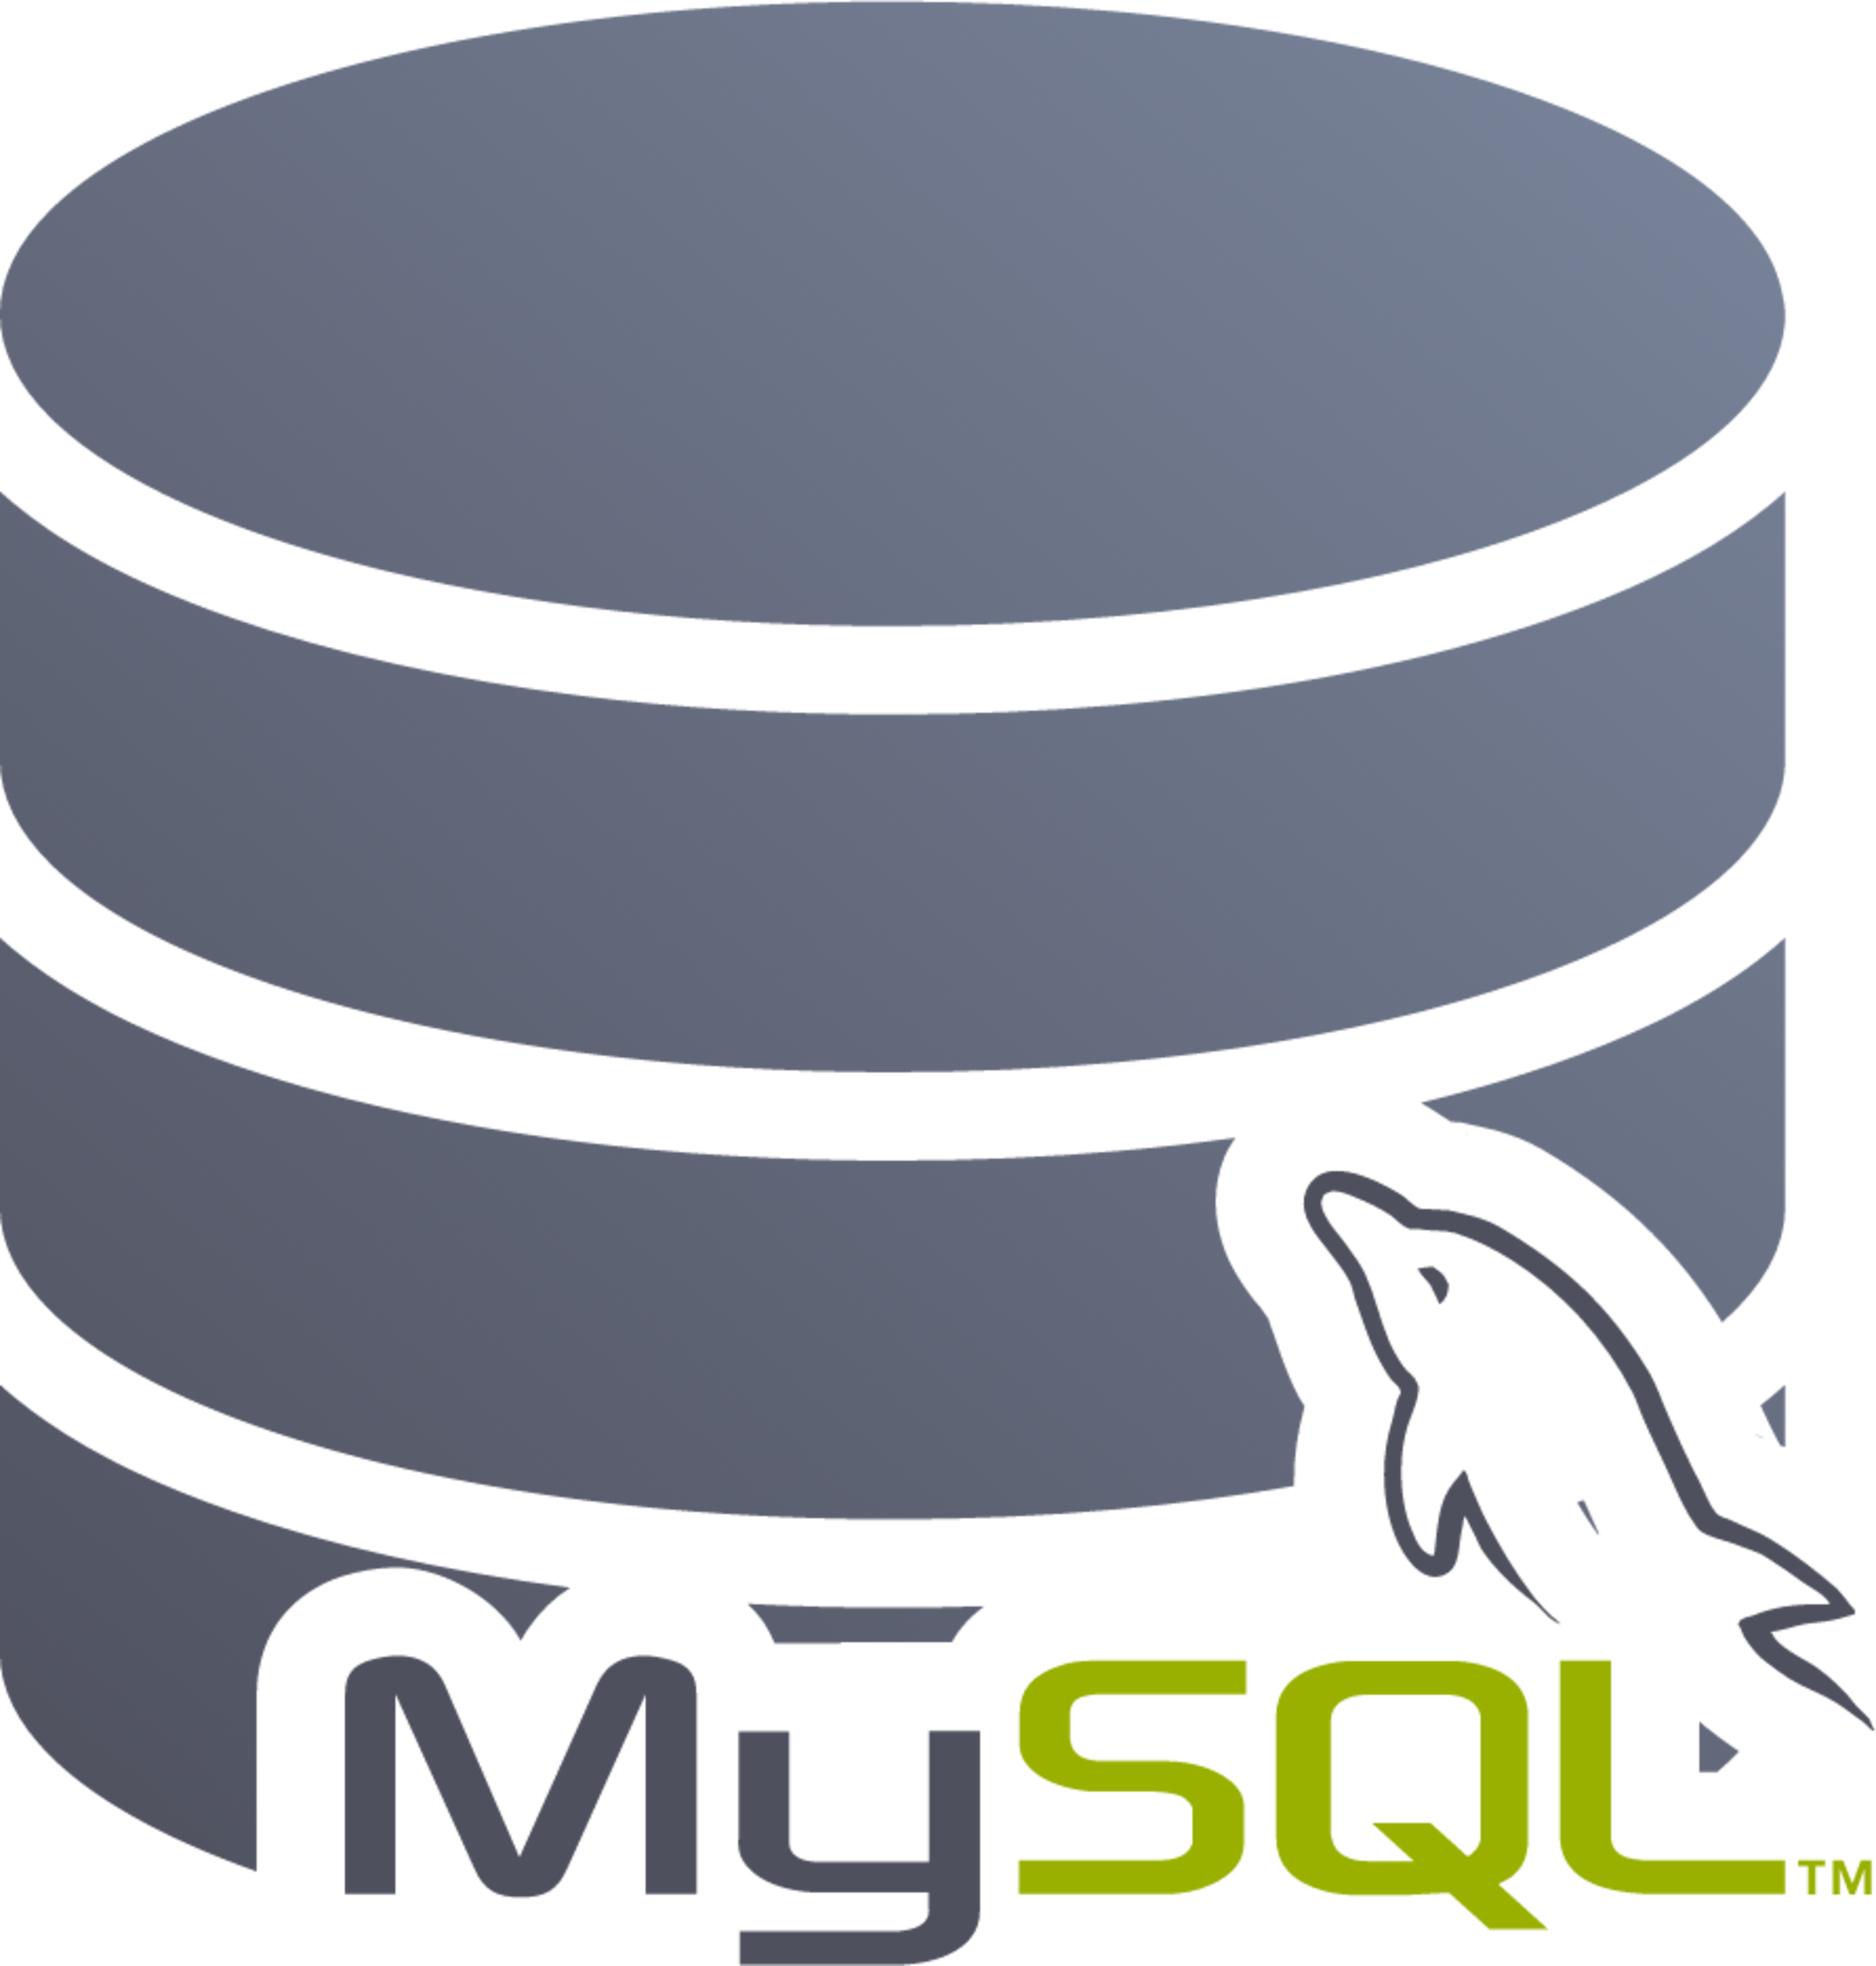 What is a MySql Database?